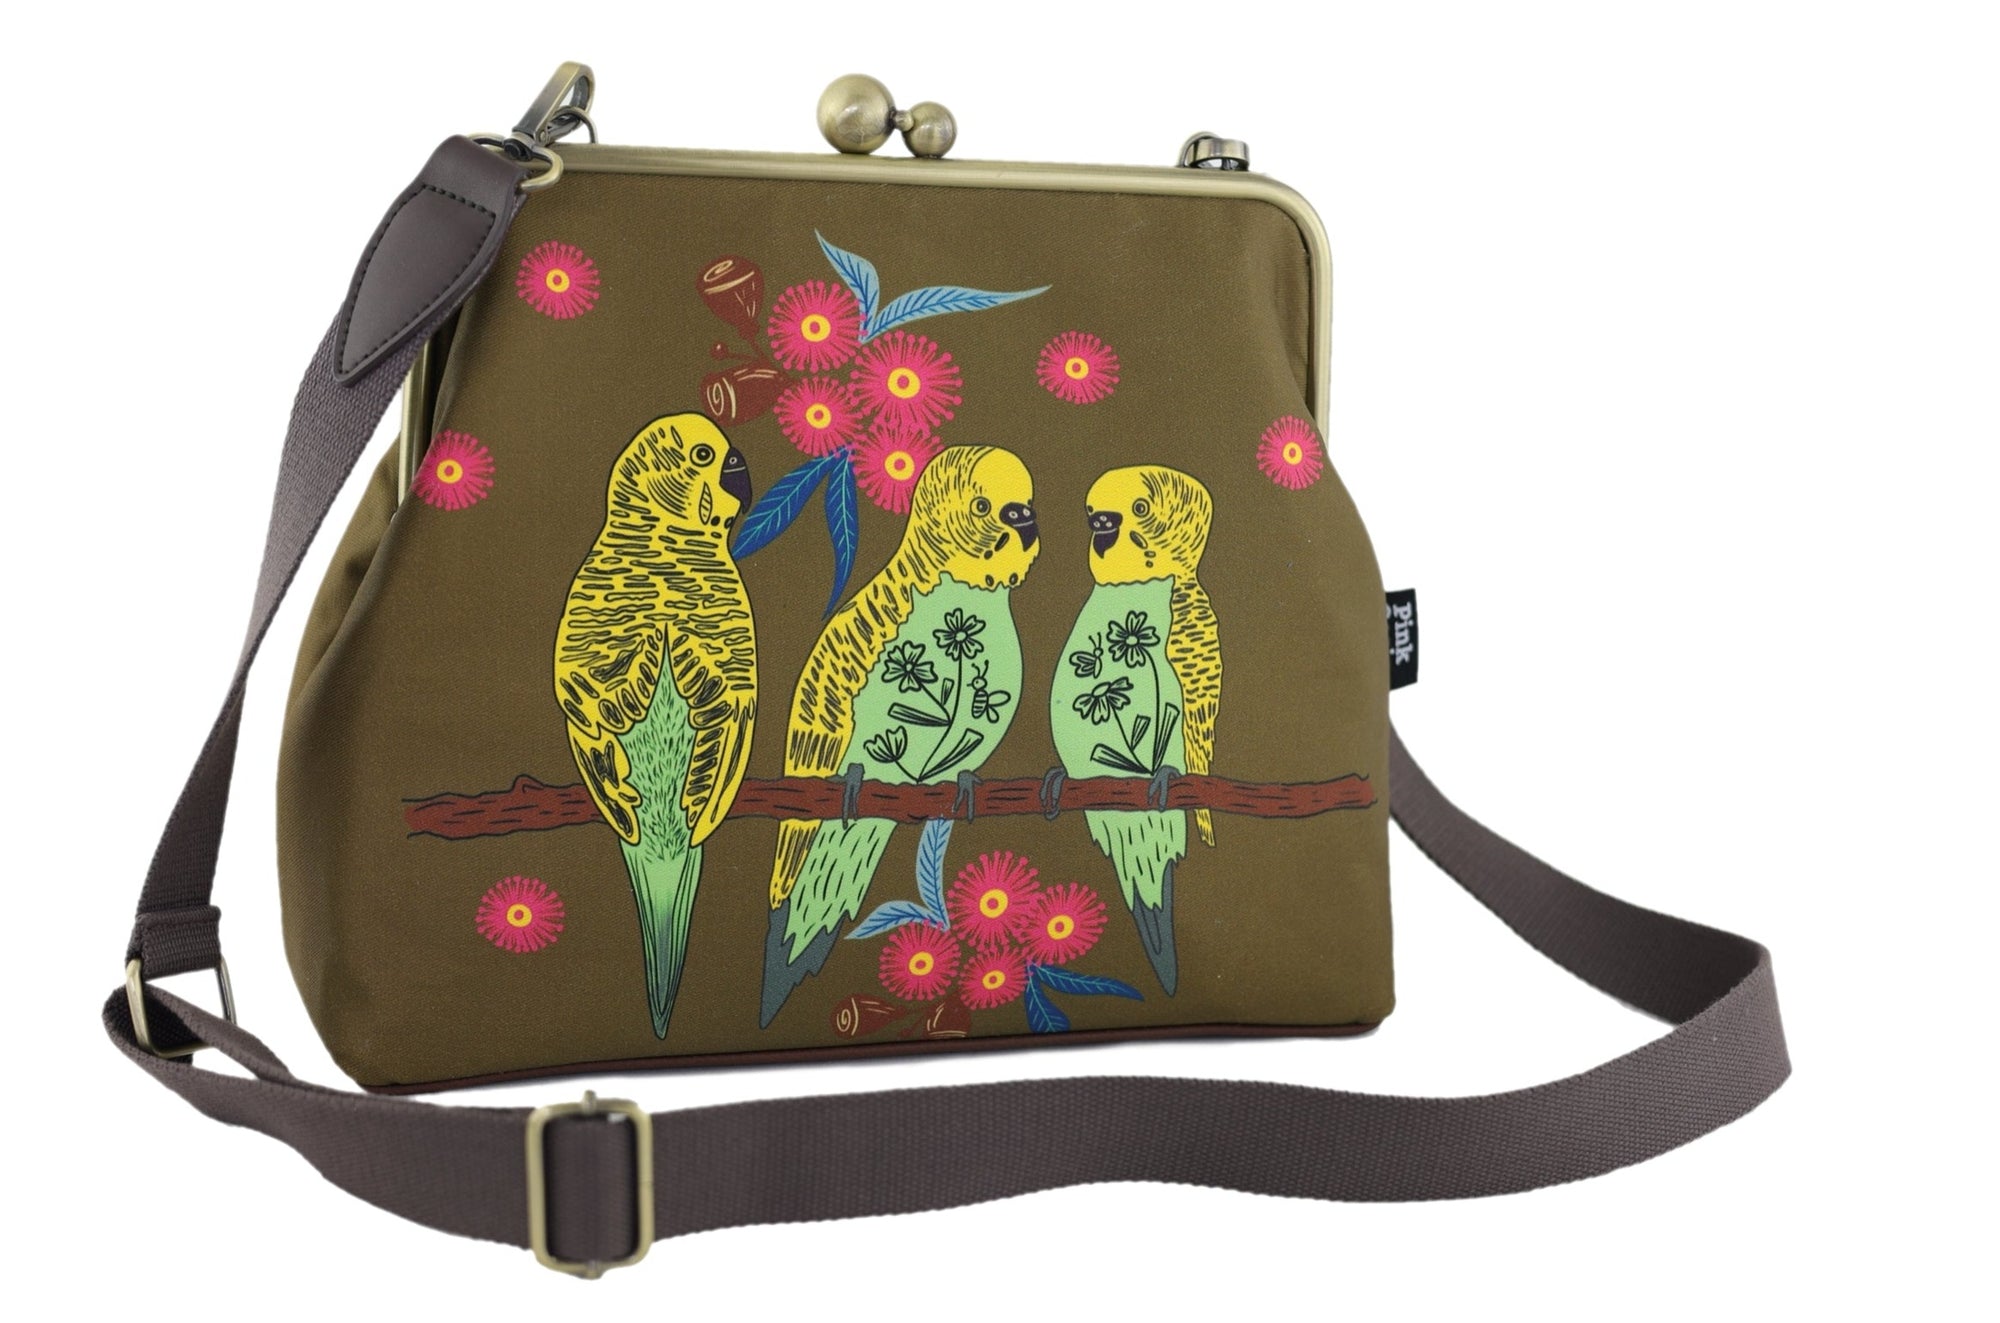 Budgies Crossbody Bag with Webbing Strap | PINK OASIS